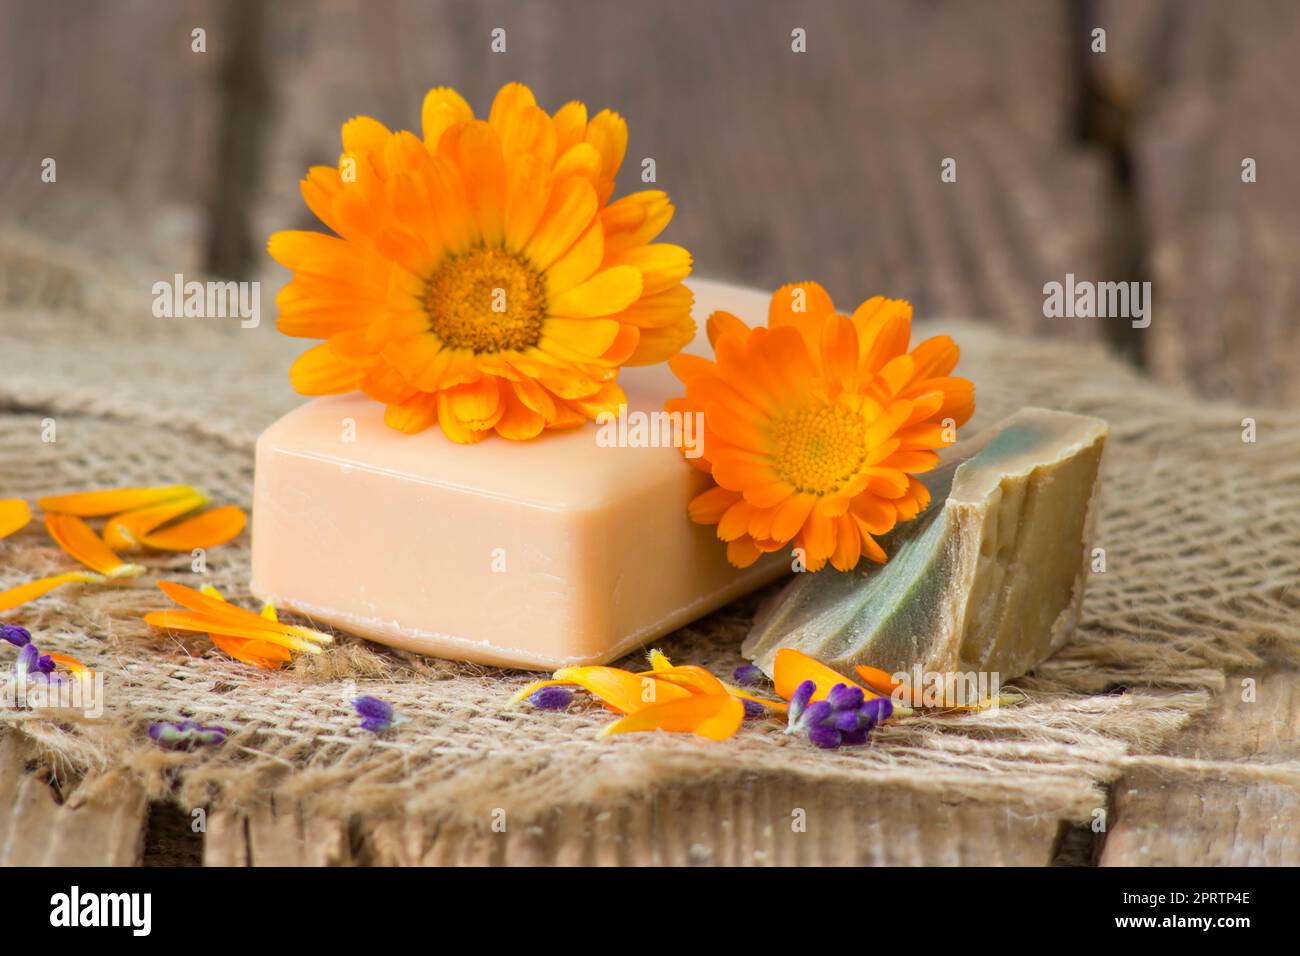 Natural Handmade Soap Wood Herbs Color Photo Background And